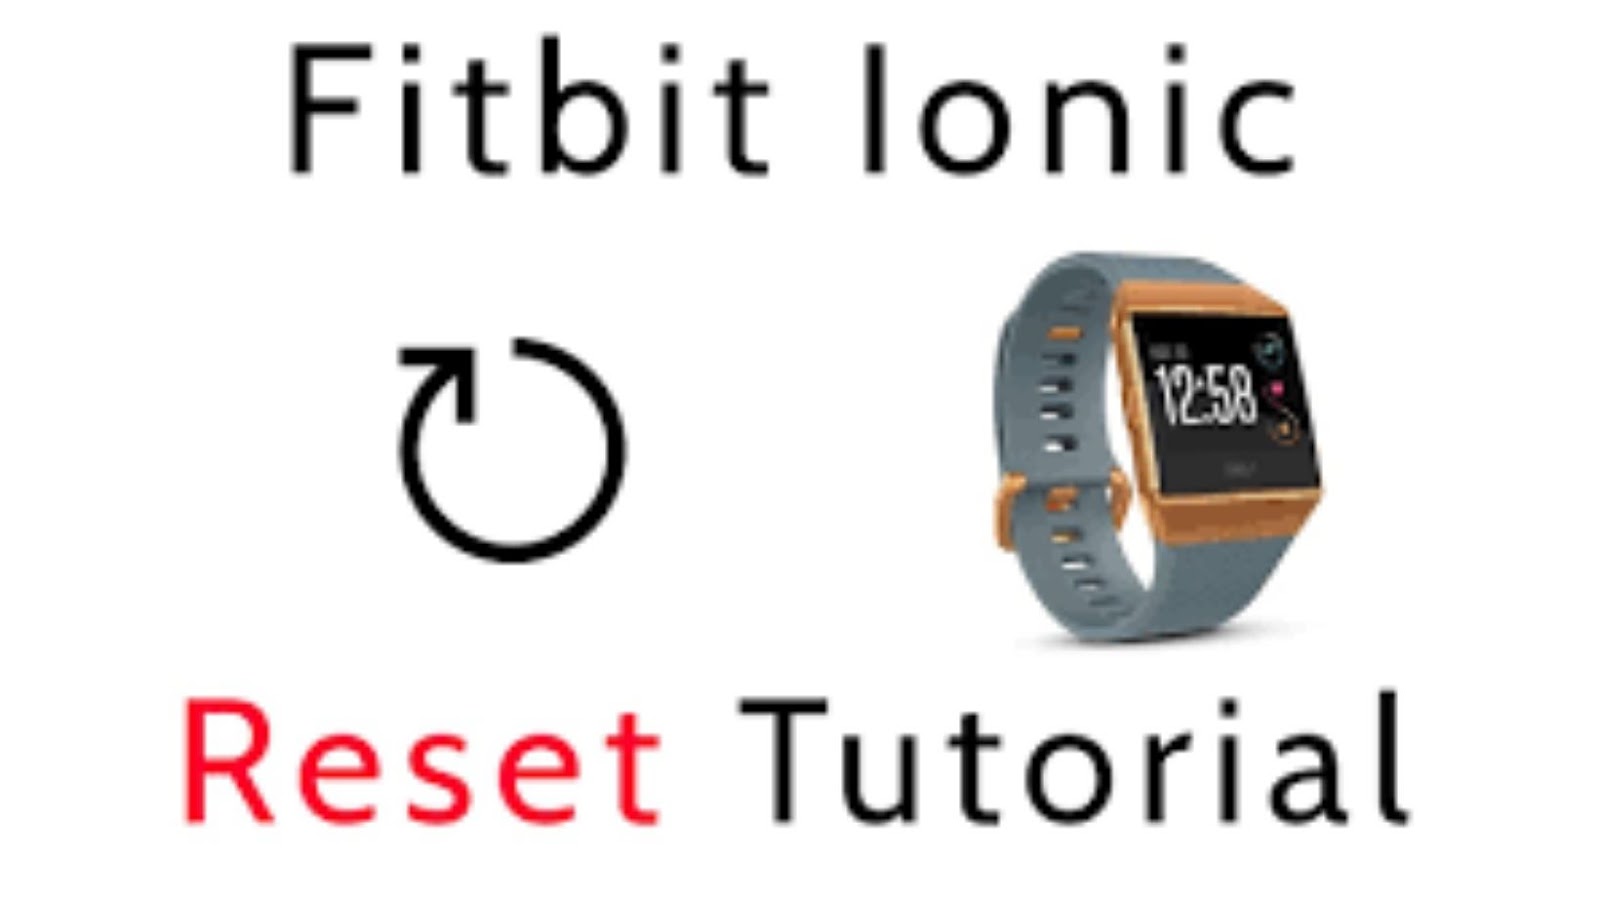 Resetting your Fitbit Inspire 2 is easy